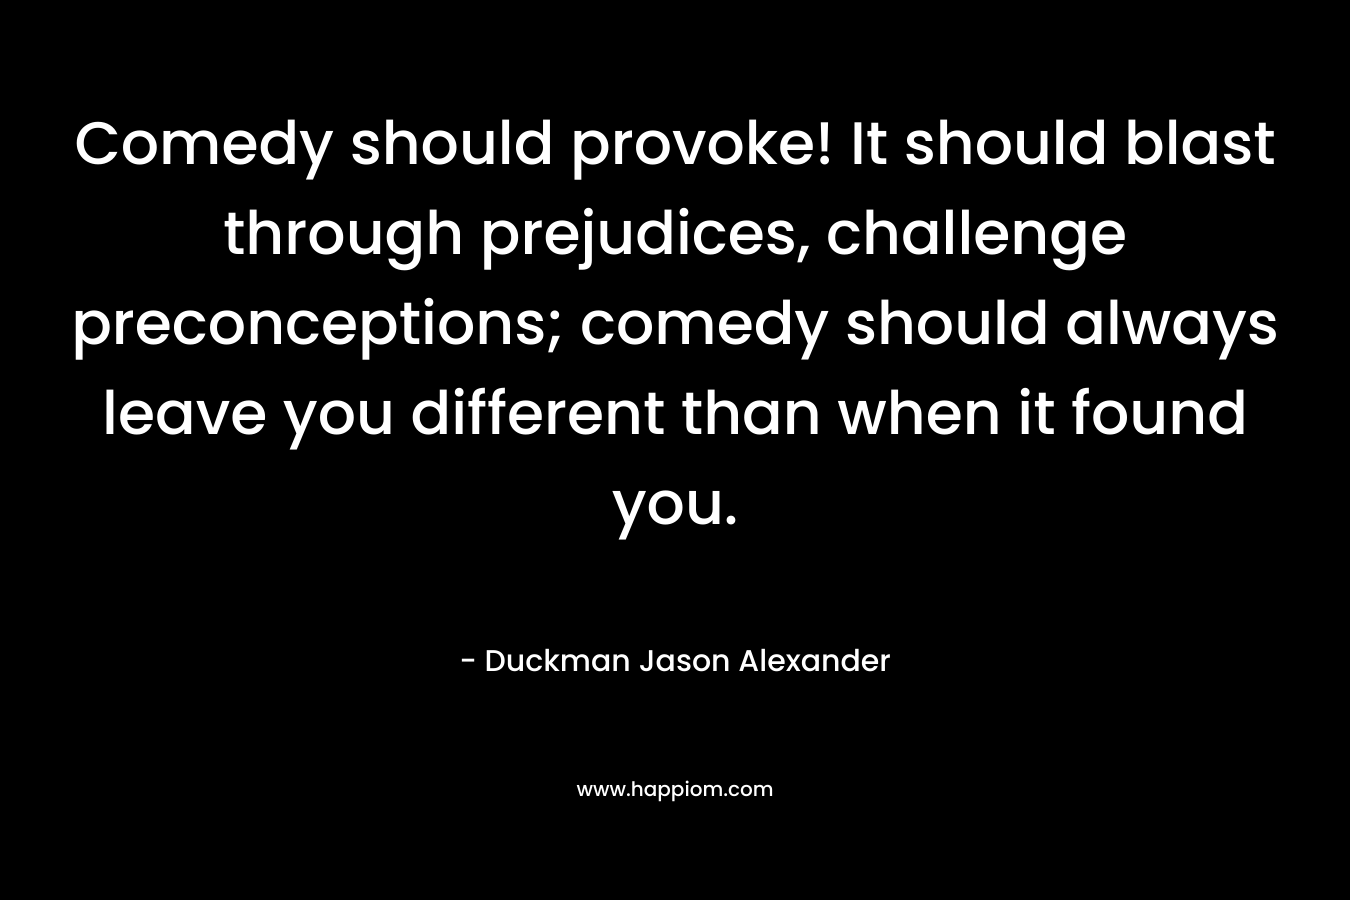 Comedy should provoke! It should blast through prejudices, challenge preconceptions; comedy should always leave you different than when it found you.